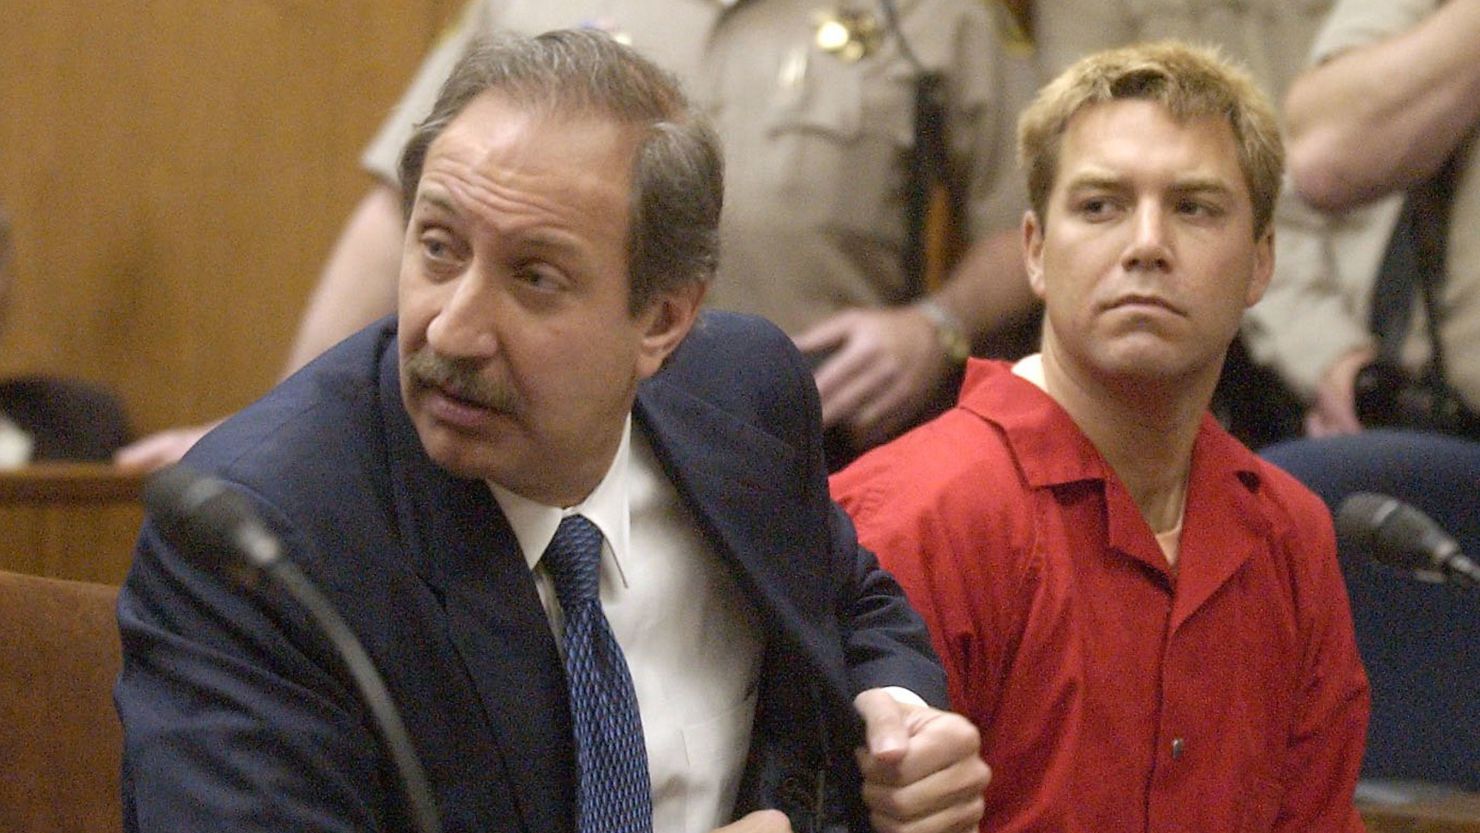 Scott Peterson (R) appears with his new attorney Mark Geragos in Stanislaus Superior Court during a change of attorney hearing May 2, 2003, in Modesto, Calif. Prominent Los Angeles defense attorney Geragos announced May 2 he would defend Peterson, accused of murdering his wife and unborn son.